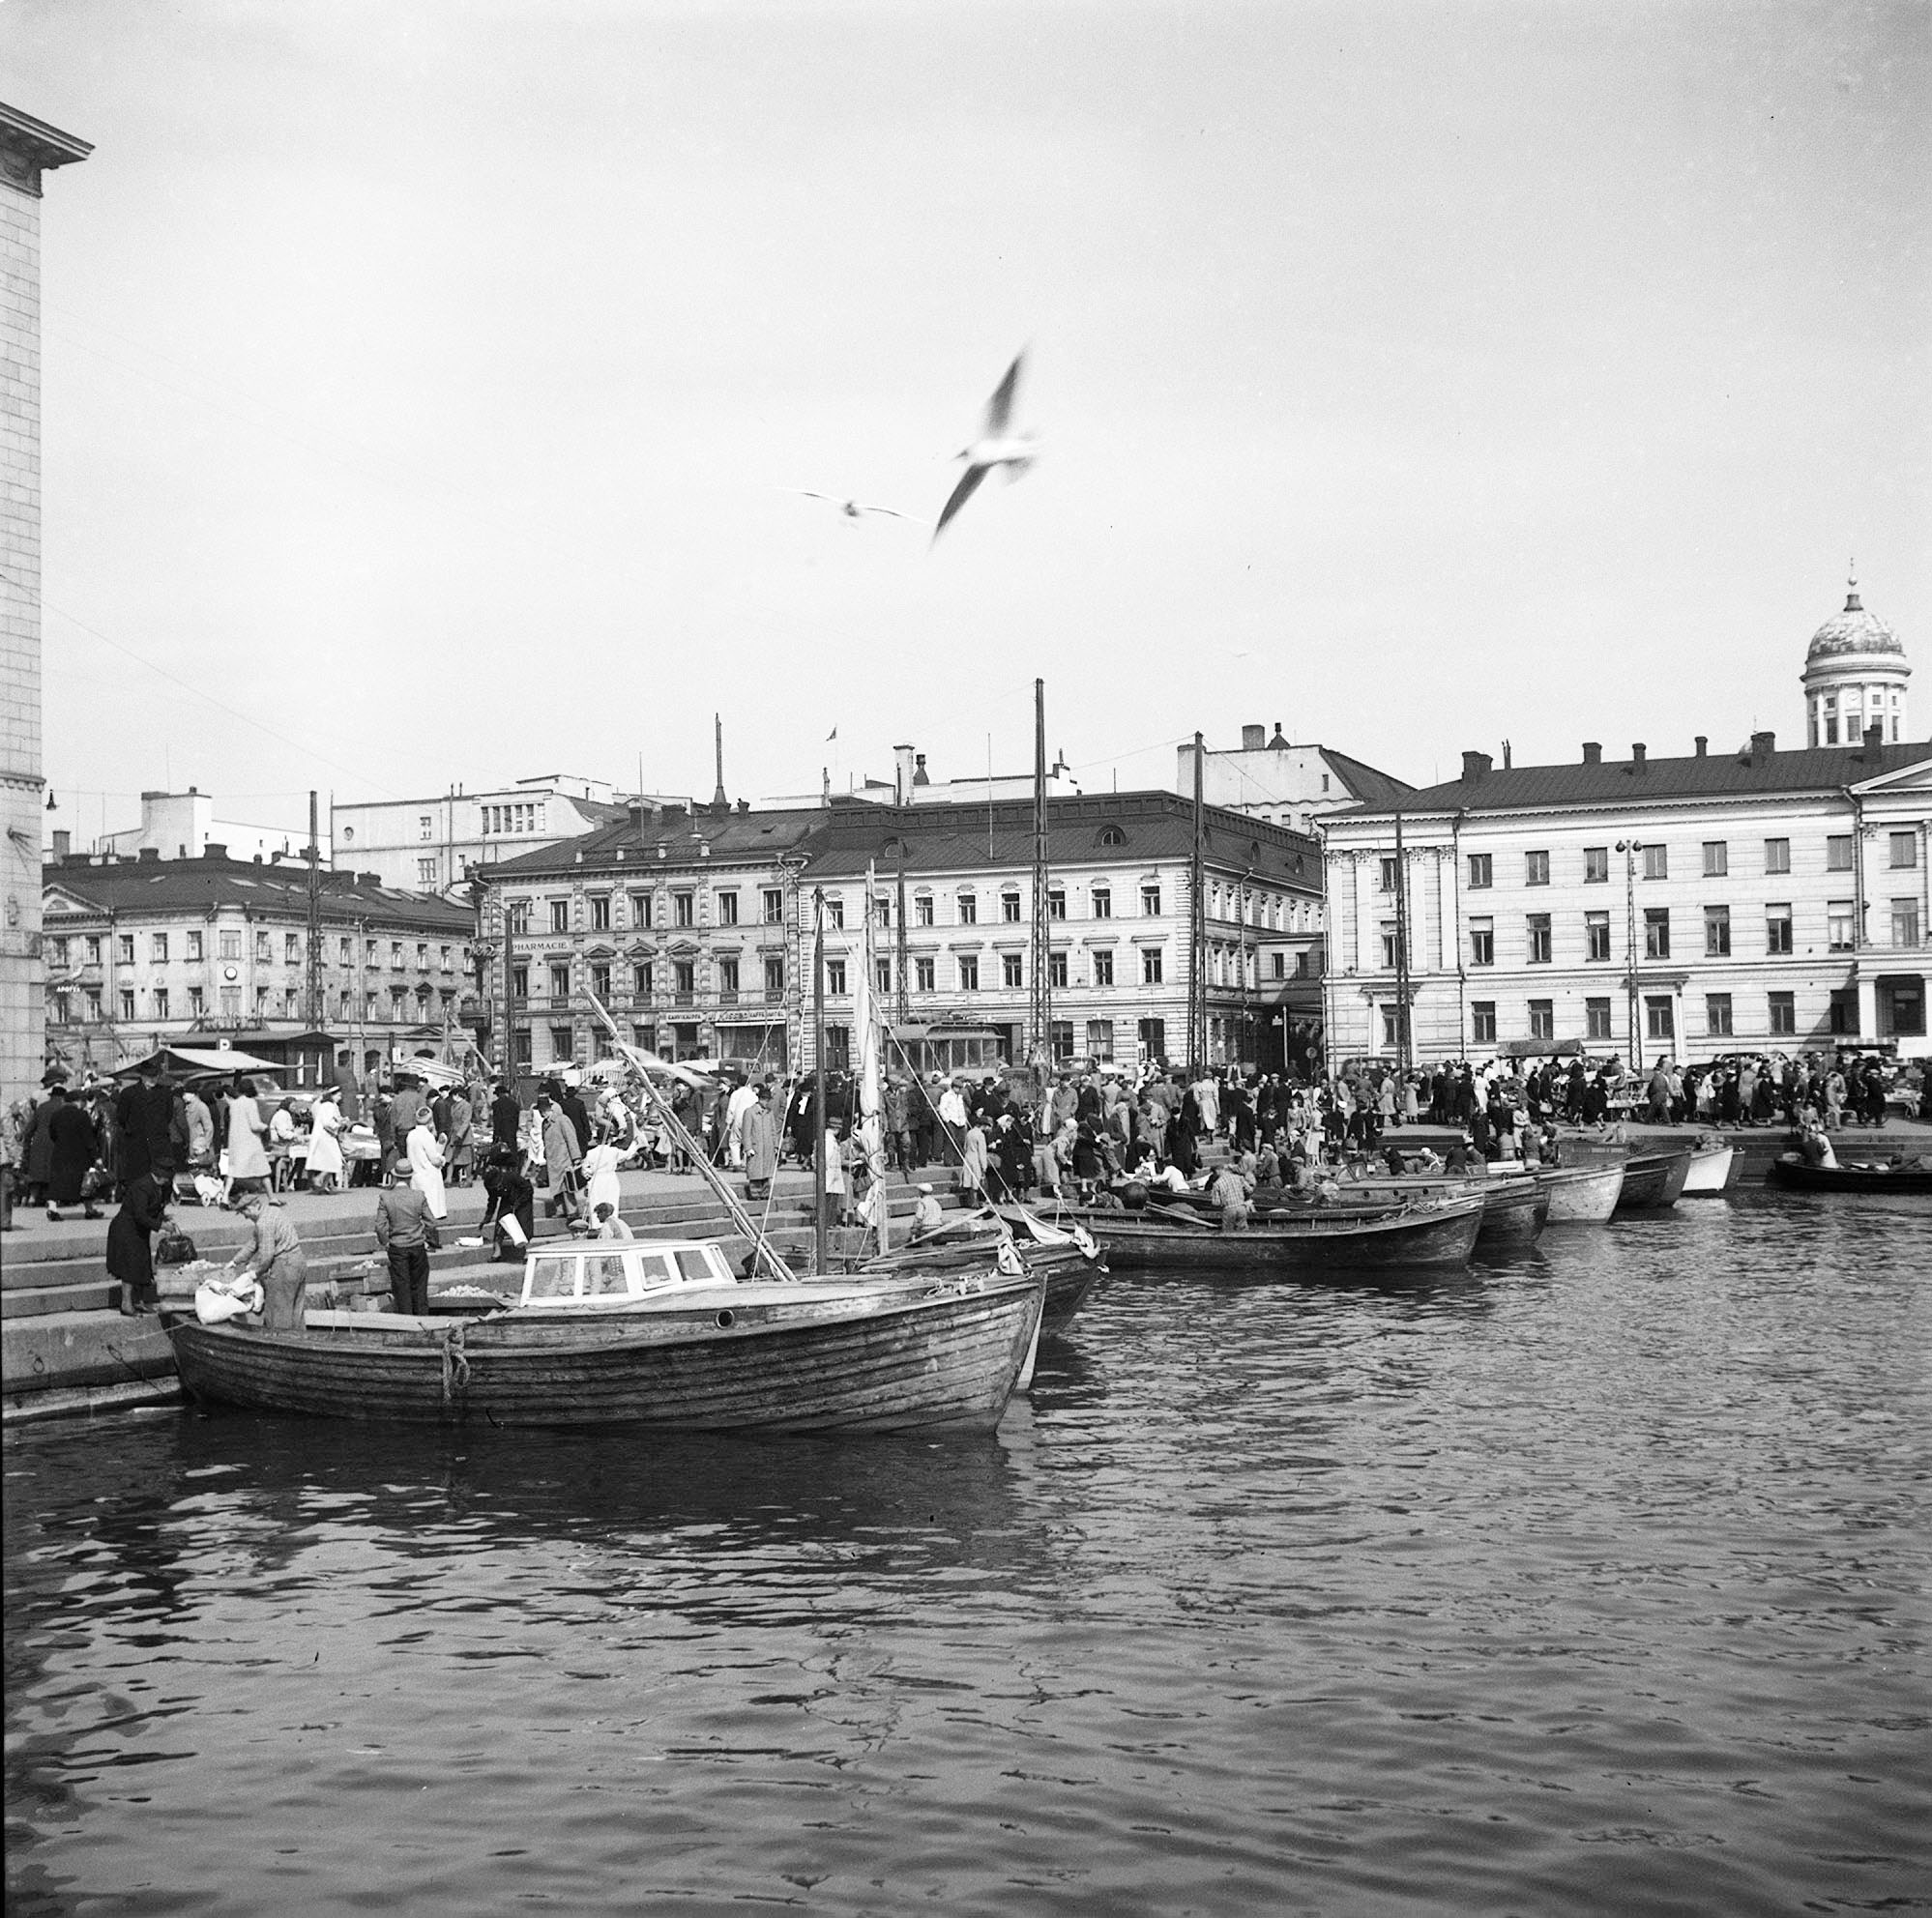 Helsinki Marketplace 1948 (28399508844) - Helsinki, Kauppaja 1.5.1948, fishermen's boats.Photo: Nokelainen/Yle.
Do you know something about this picture? Please leave a comment or contact us by e-mail: flickr@yle.fi Read more about Yle, the Finnish Broadcasting Company: http://yle.fi/life park Fler skatter från Yles archive: http://svenska.yle.fi/arkivet More about Yle, the Finnish Broadcasting Company: http://yle.fi/yleisradio/ About-yle/this-is-yle